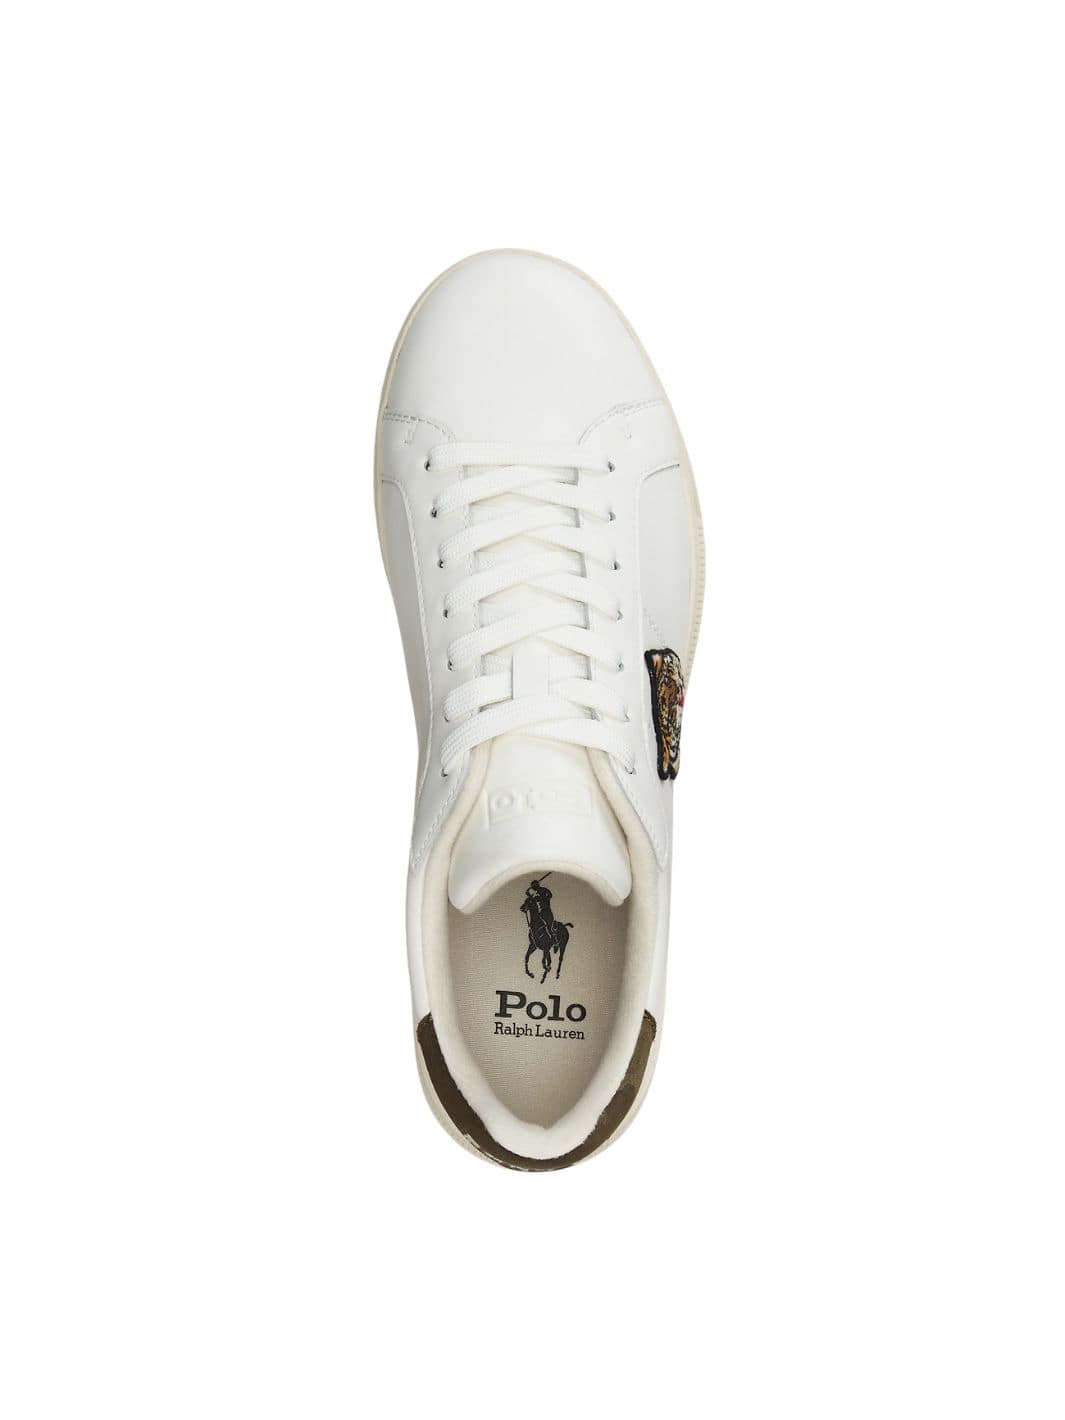 Polo Ralph Lauren Shoes Sneakers | Tiger Court White